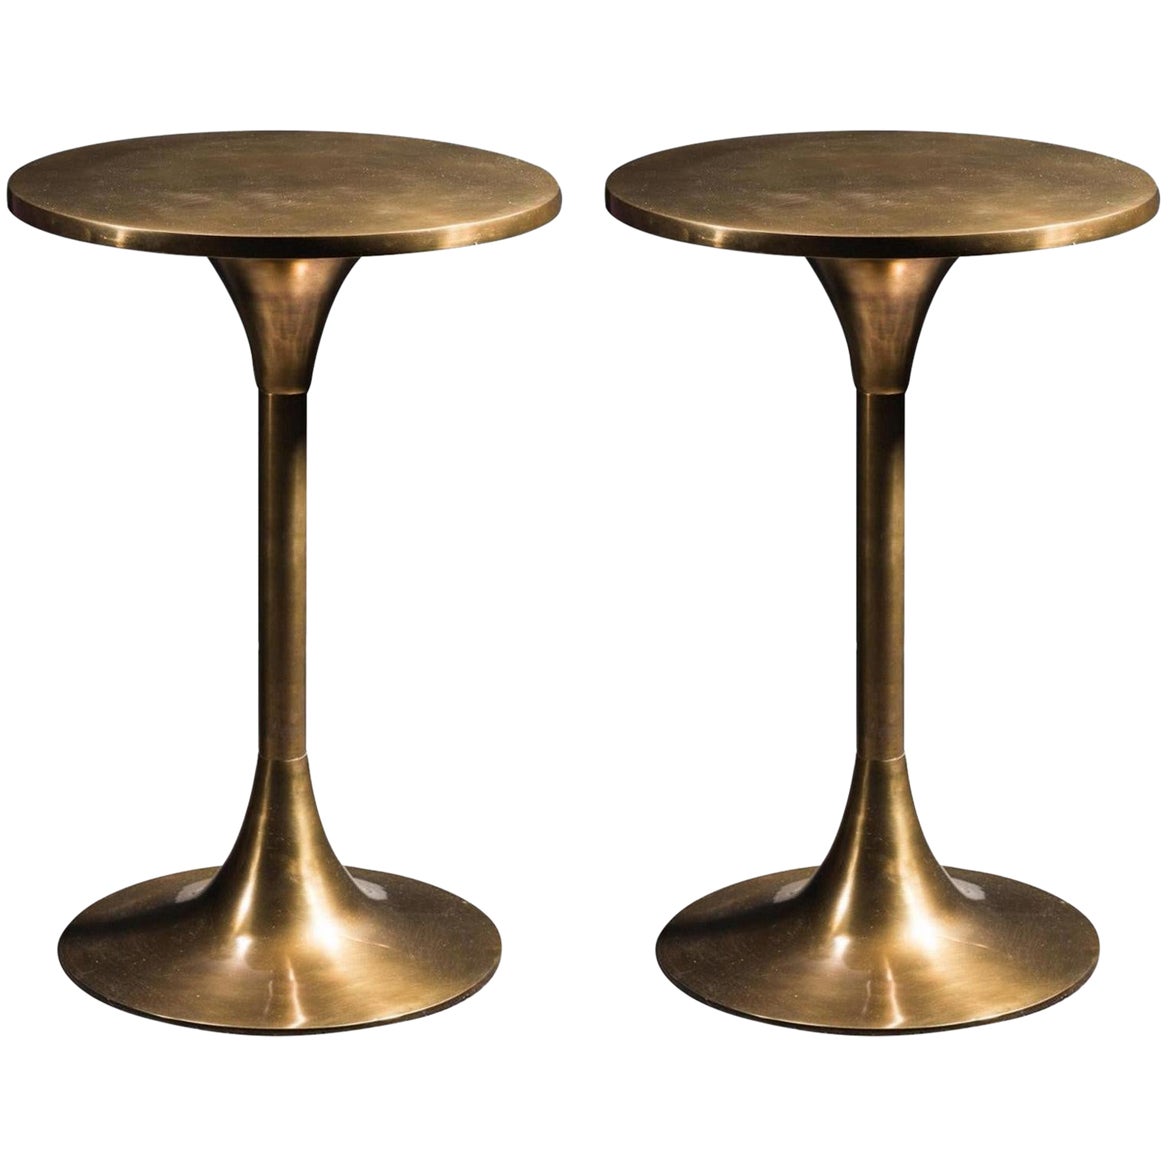 1960s Design Style Pair of Patina Brass Side Tables For Sale